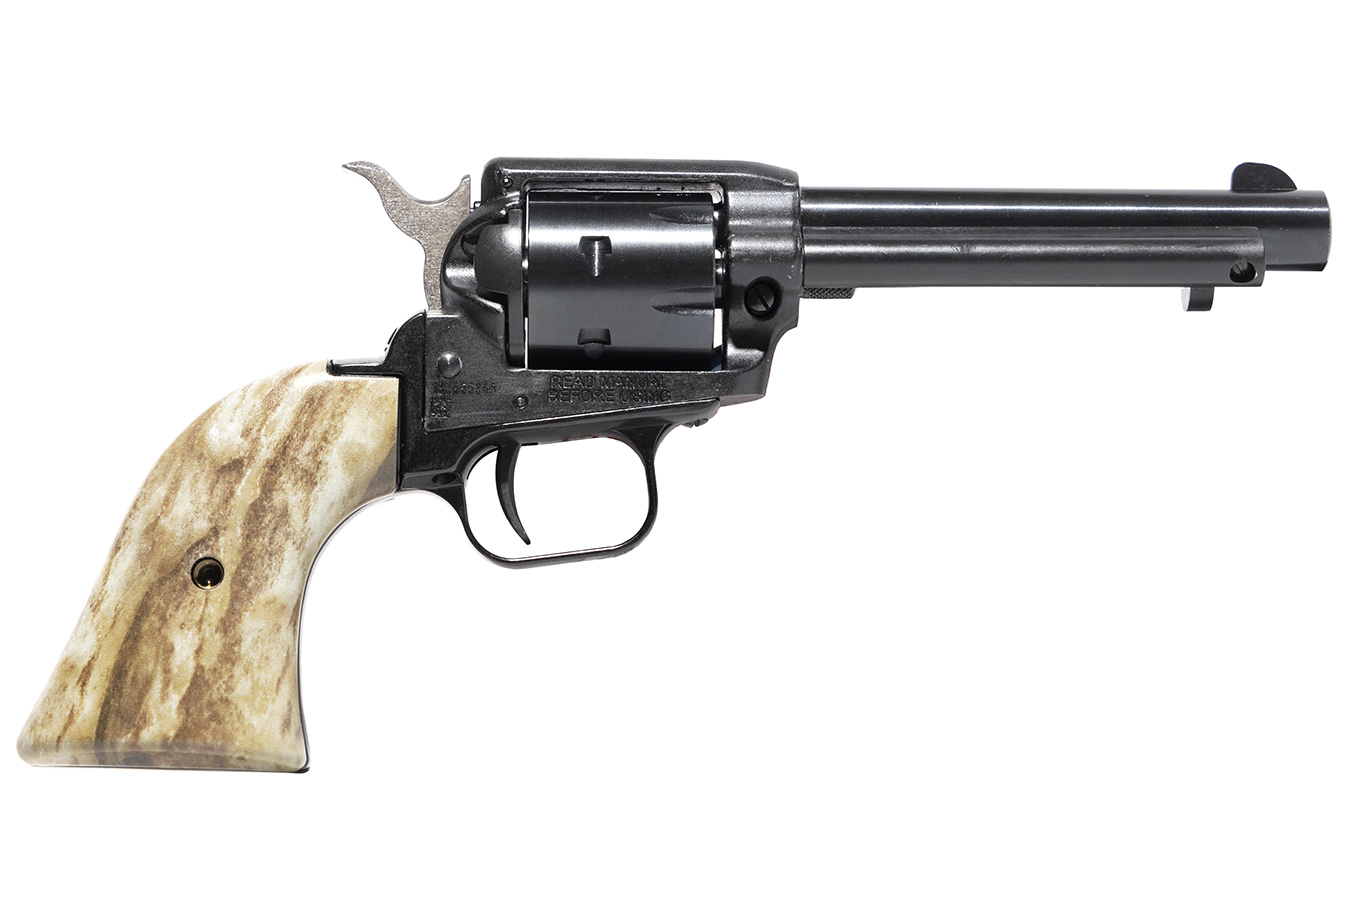 No. 18 Best Selling: HERITAGE ROUGH RIDER 22LR REVOLVER WITH BLUED BARREL AND STAG GRIPS